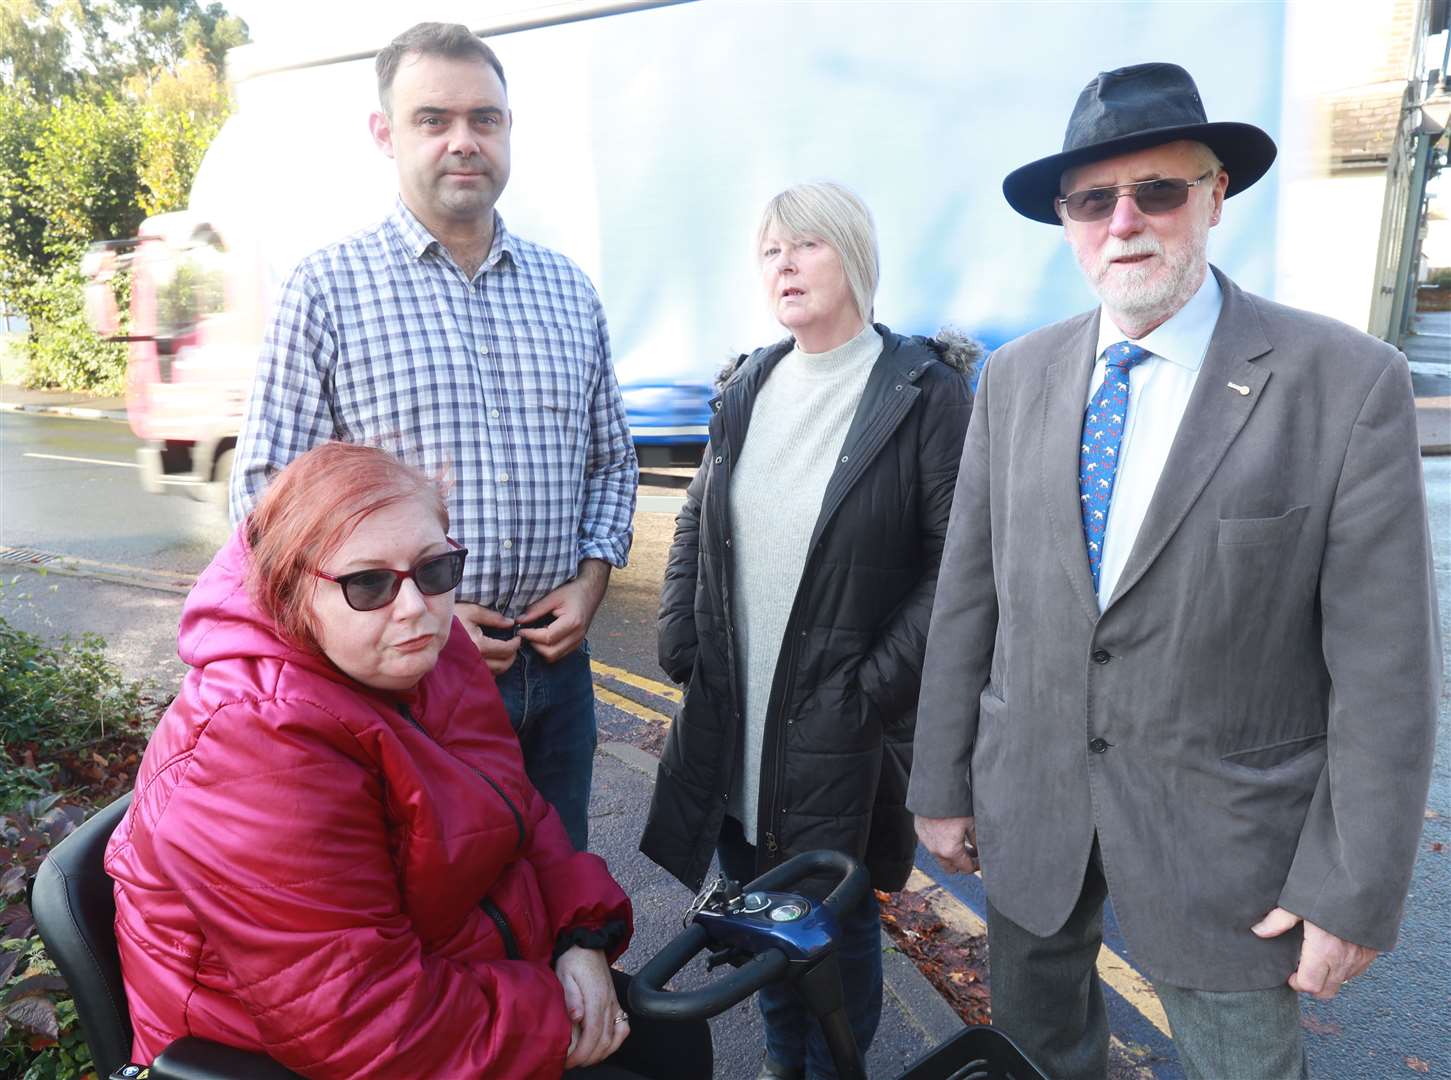 From left, Lizzy Hare, James Willis, Alison Taylor and Cllr Brian Vizzard at the junction of St Andrew's Road and Hermitage Lane. Picture: John Westhrop